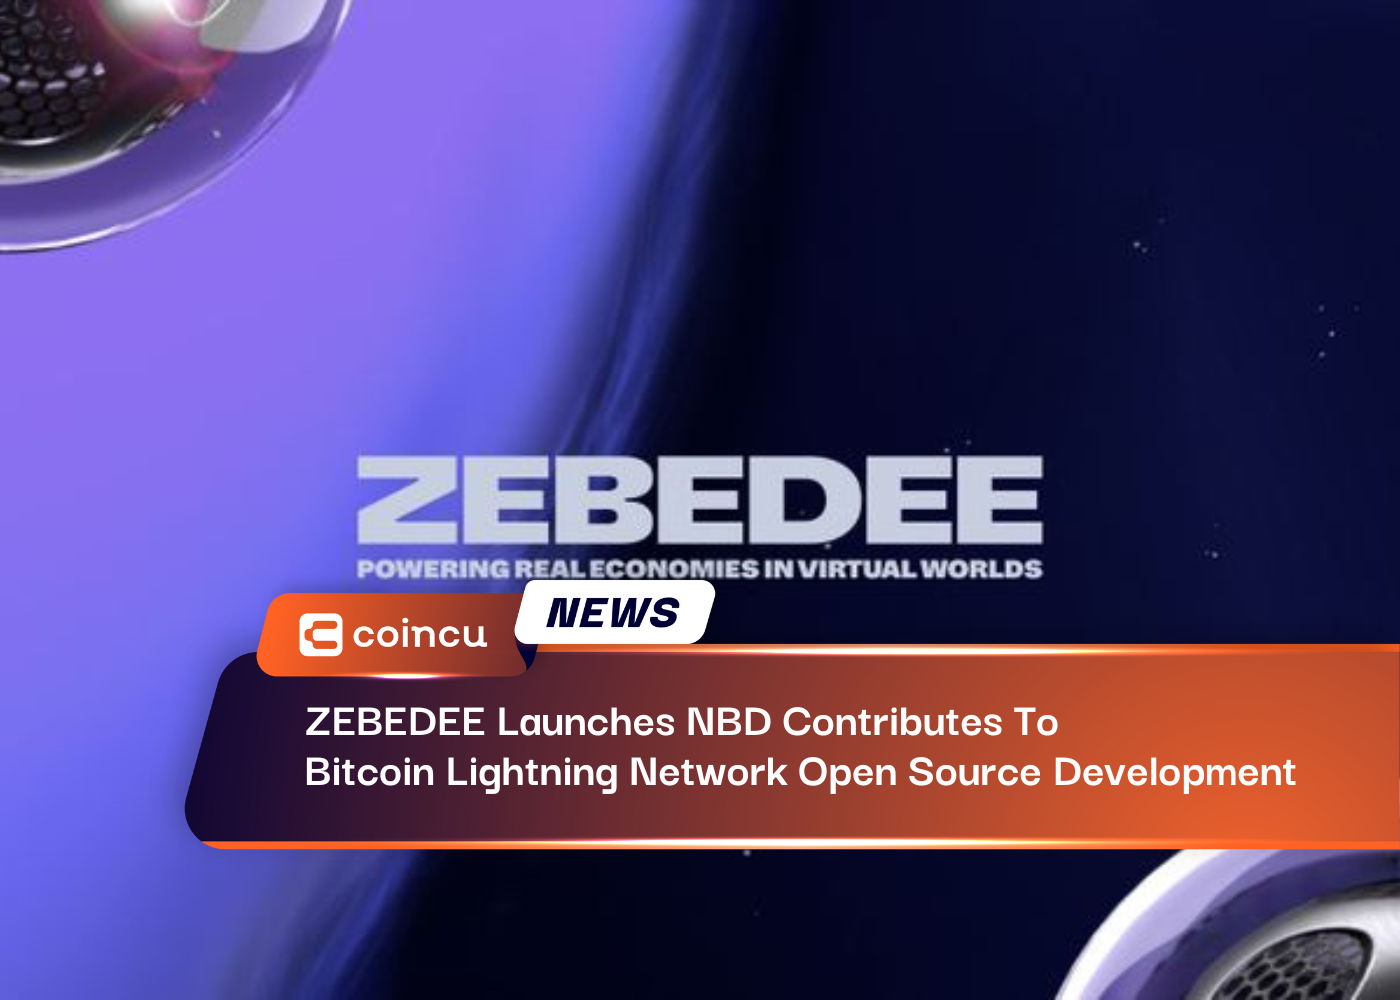 ZEBEDEE Launches NBD To Contribute To Open Source Development Of Bitcoin Lightning Network